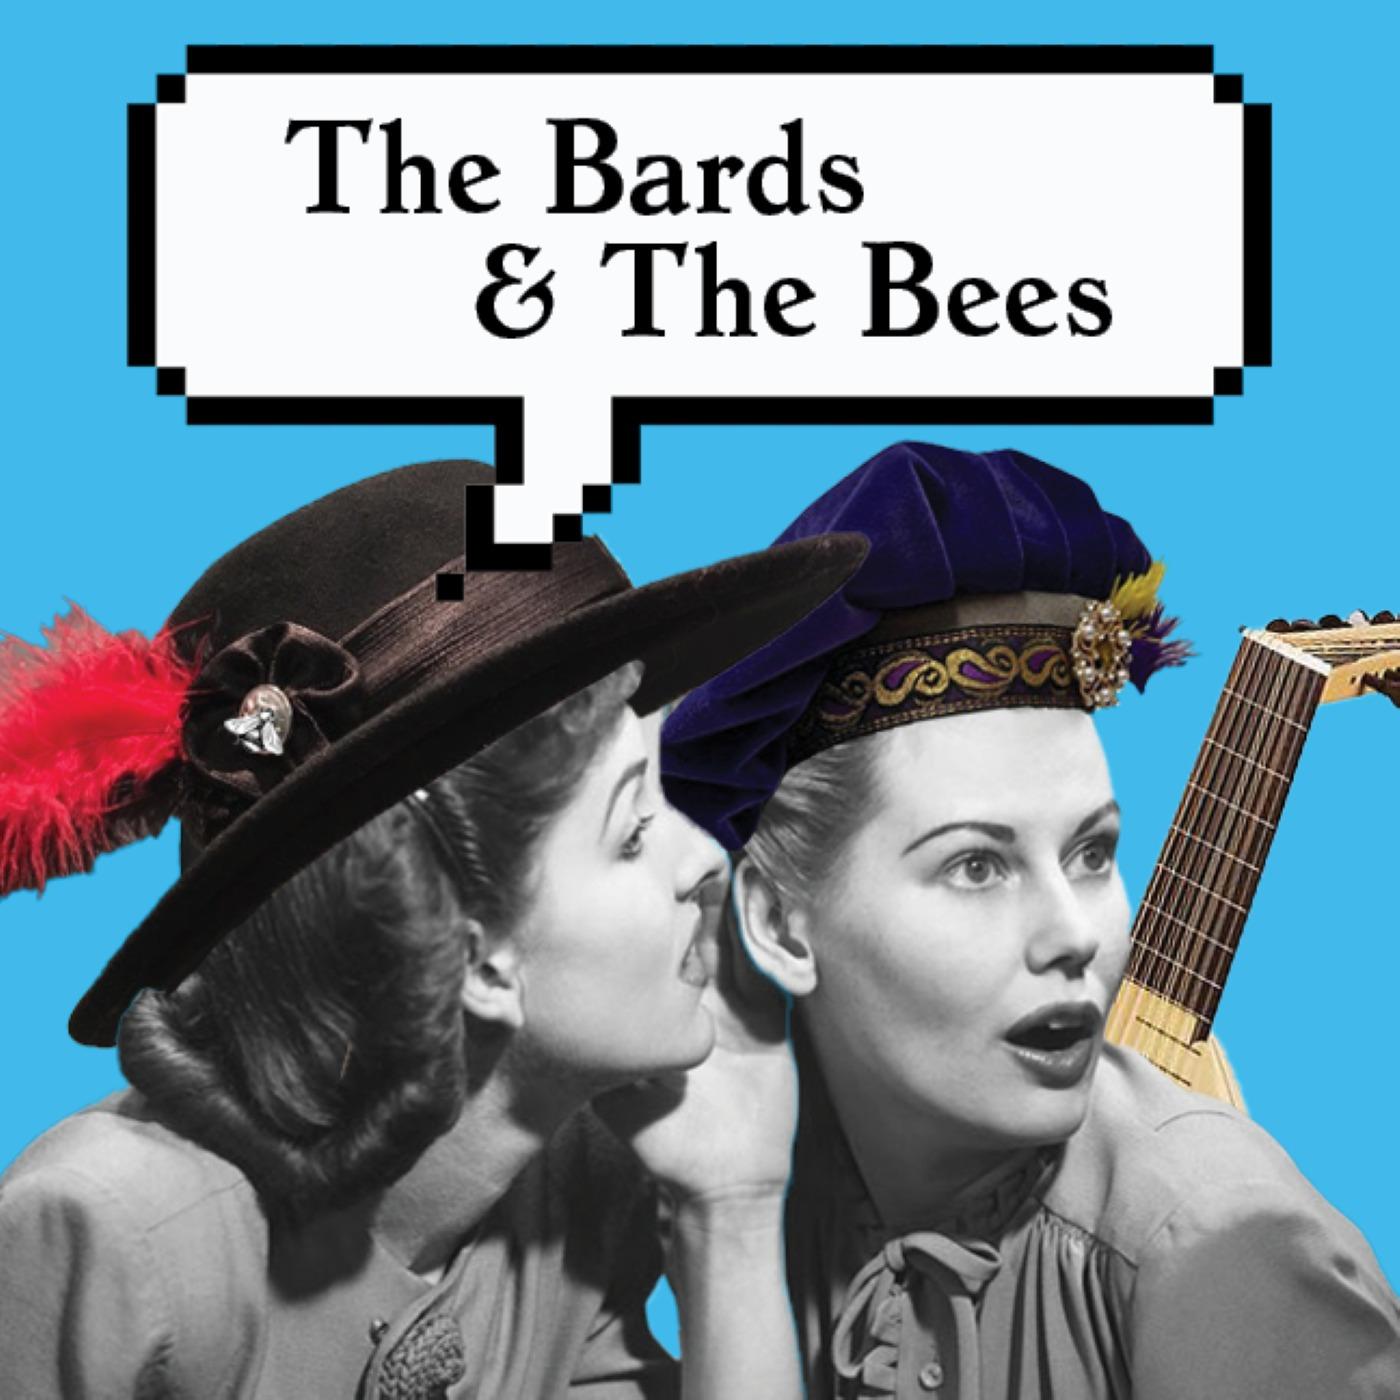 The Bards and The Bees